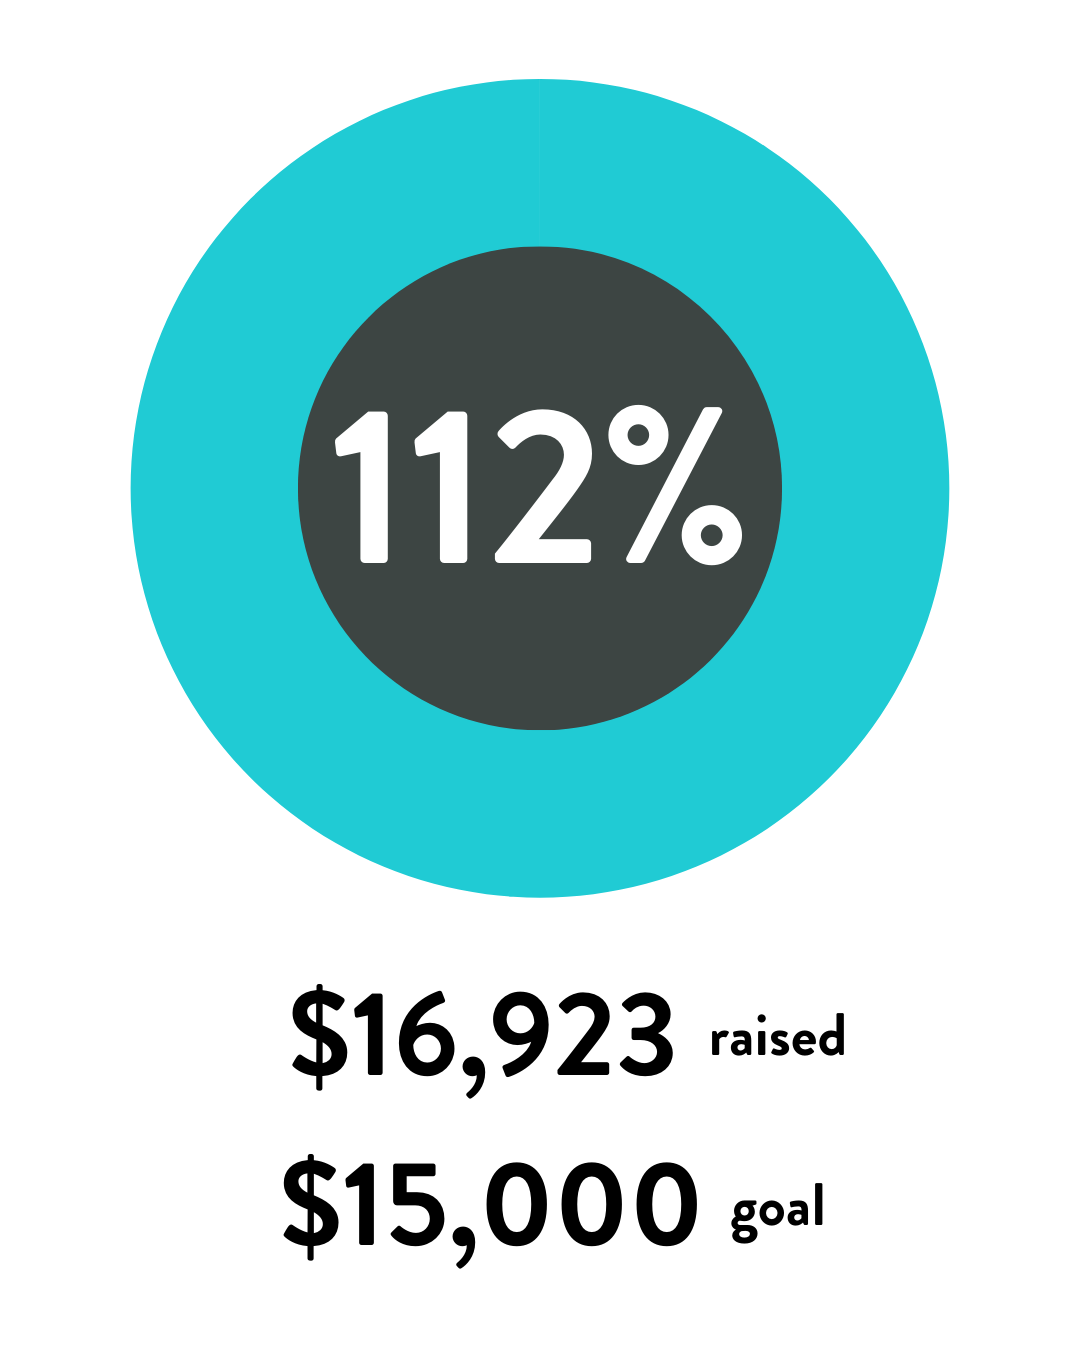 112% of our anniversary giving campaign goal was met. We raised $16,923 of our goal of $15,000.